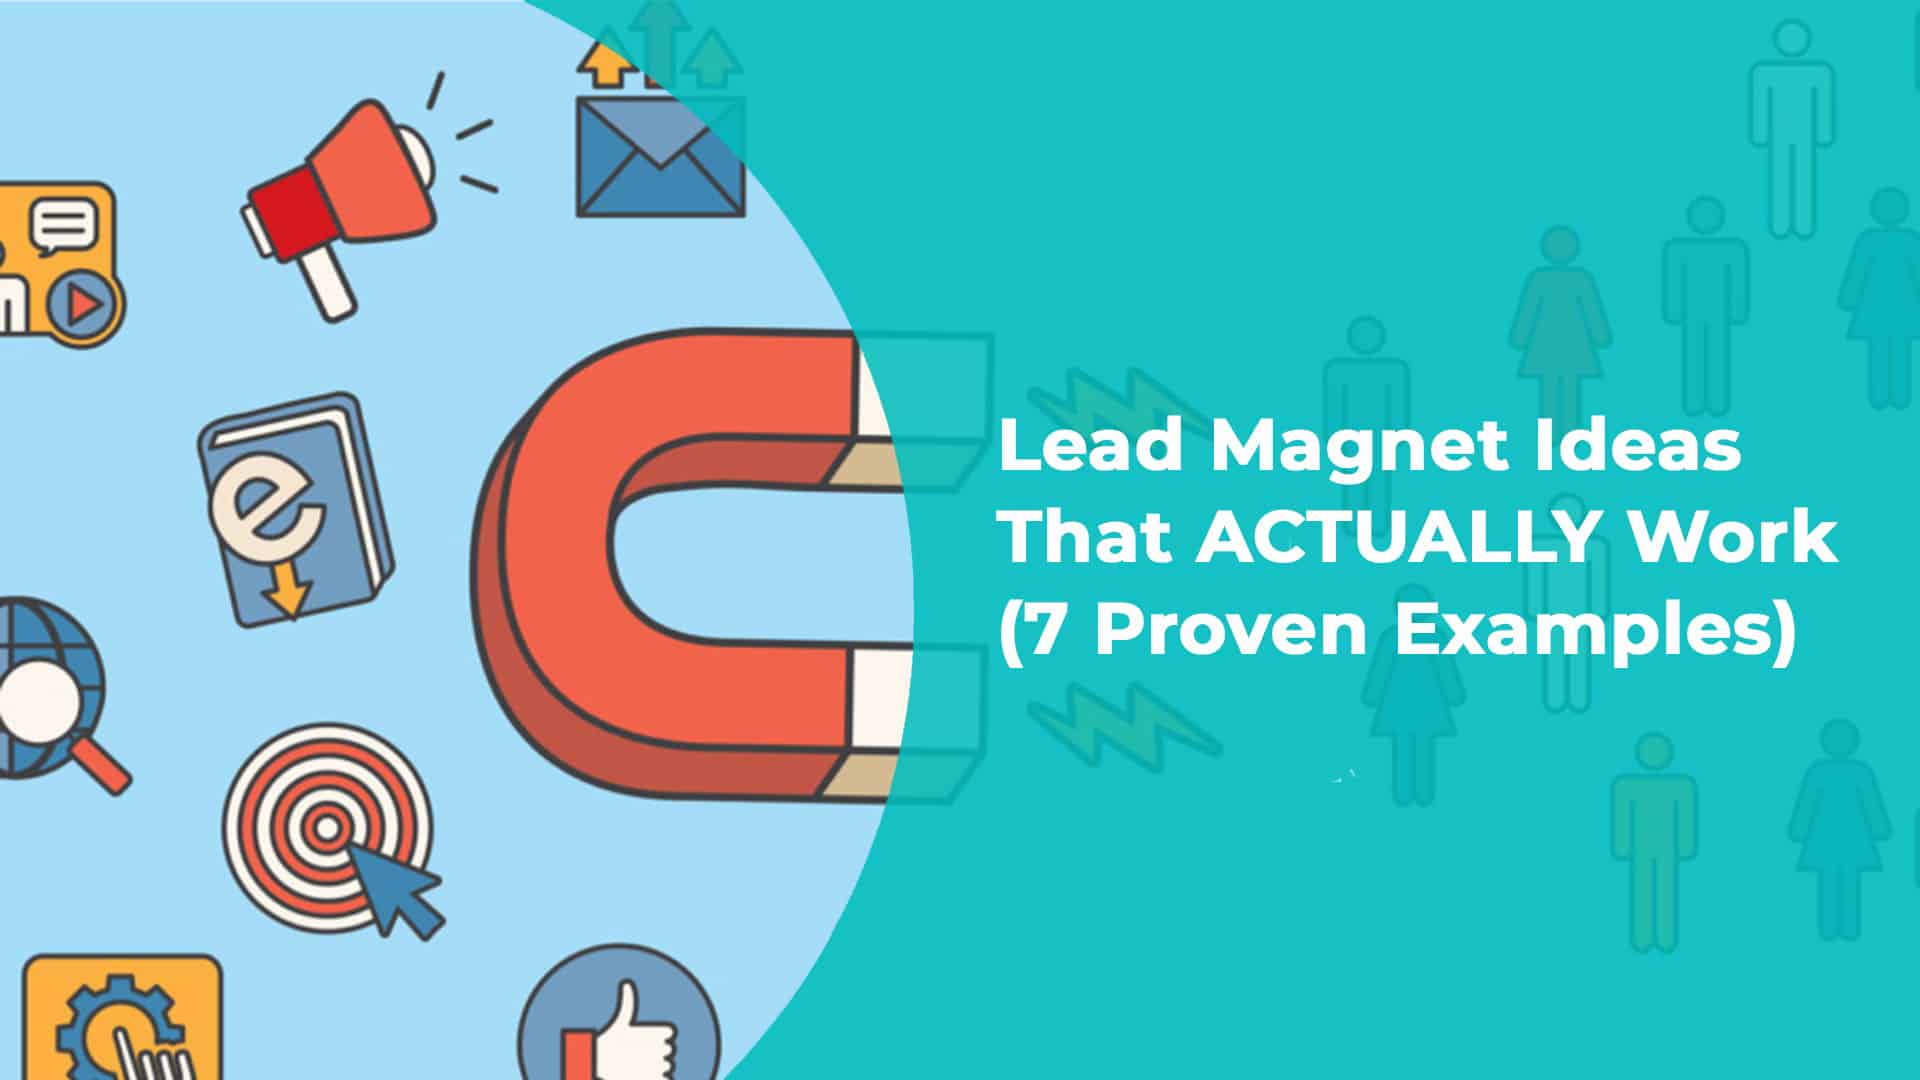 Lead Magnet Ideas That ACTUALLY Work (7 Proven Examples)